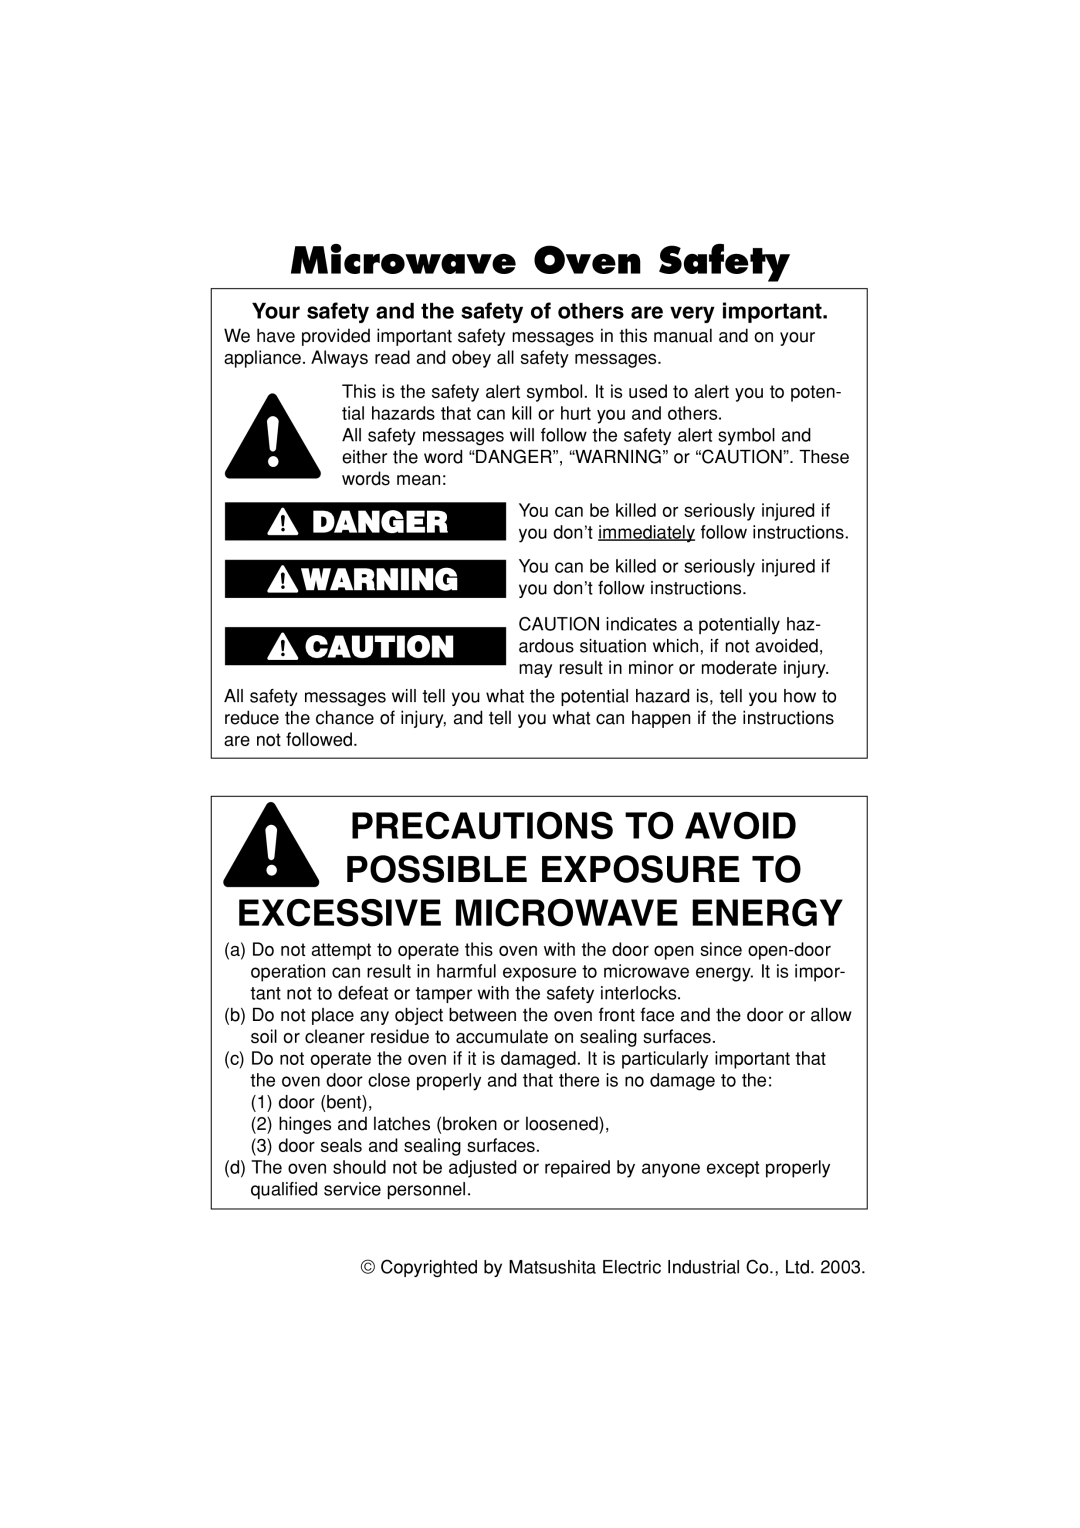 Panasonic NN-S443 Excessive Microwave Energy, Precautions To Avoid Possible Exposure To, Danger, Microwave Oven Safety 